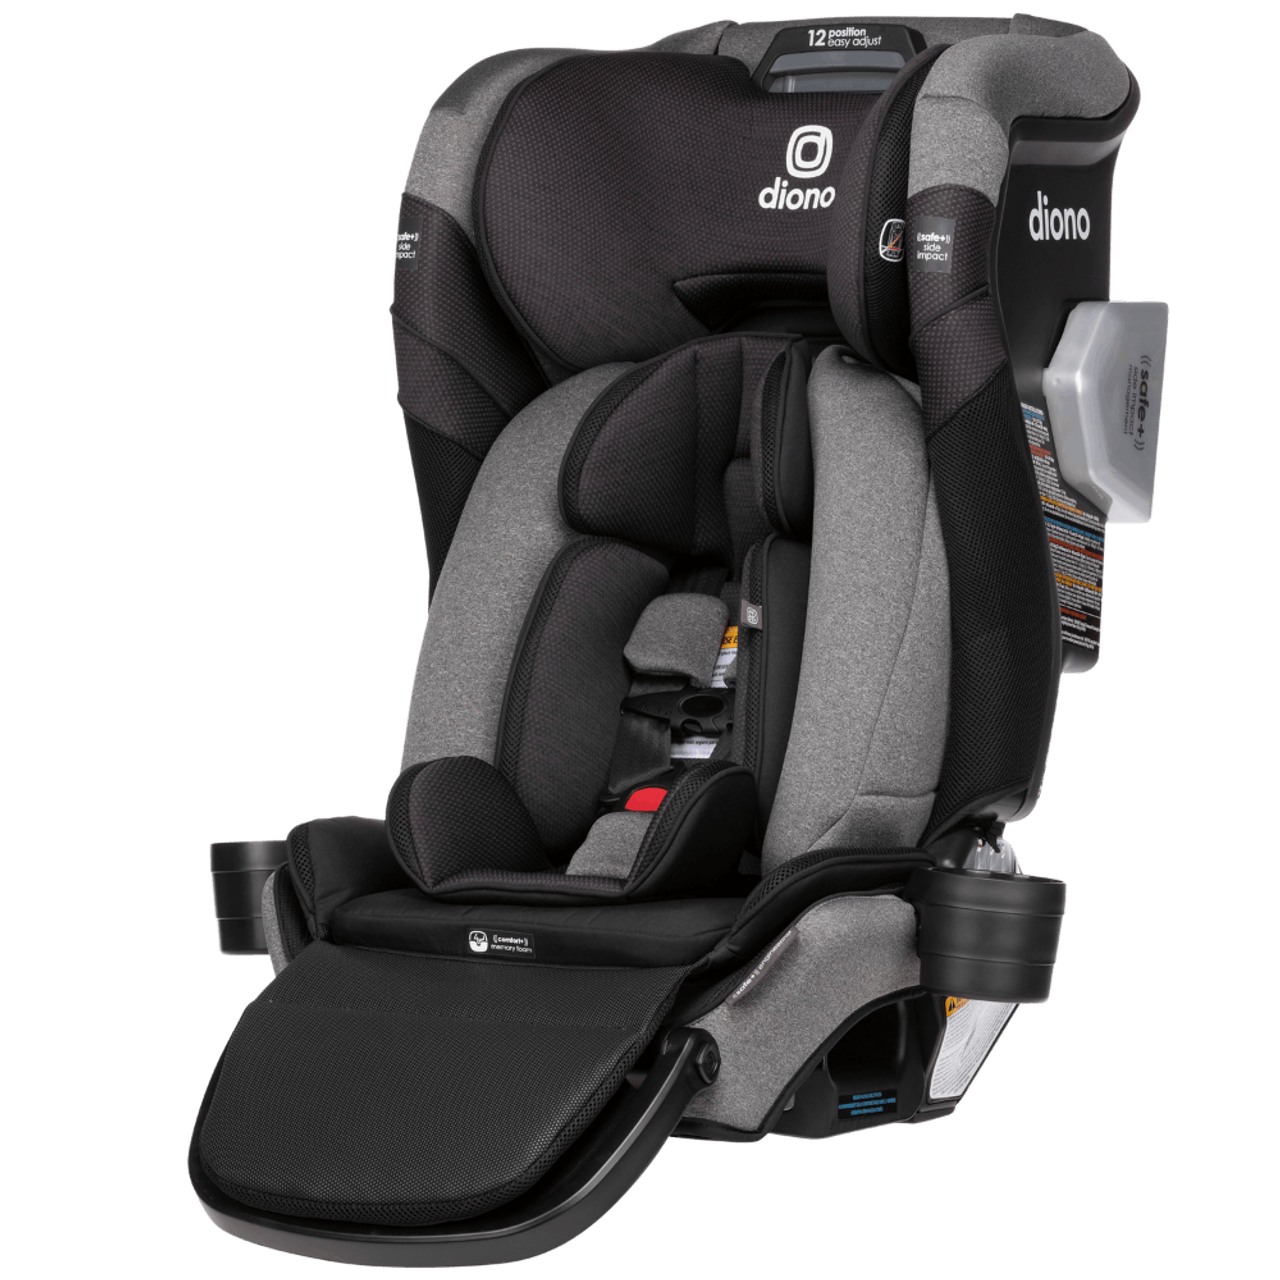 Diono Radian® 3QXT+ All-in-One Convertible Car Seat · Black Jet